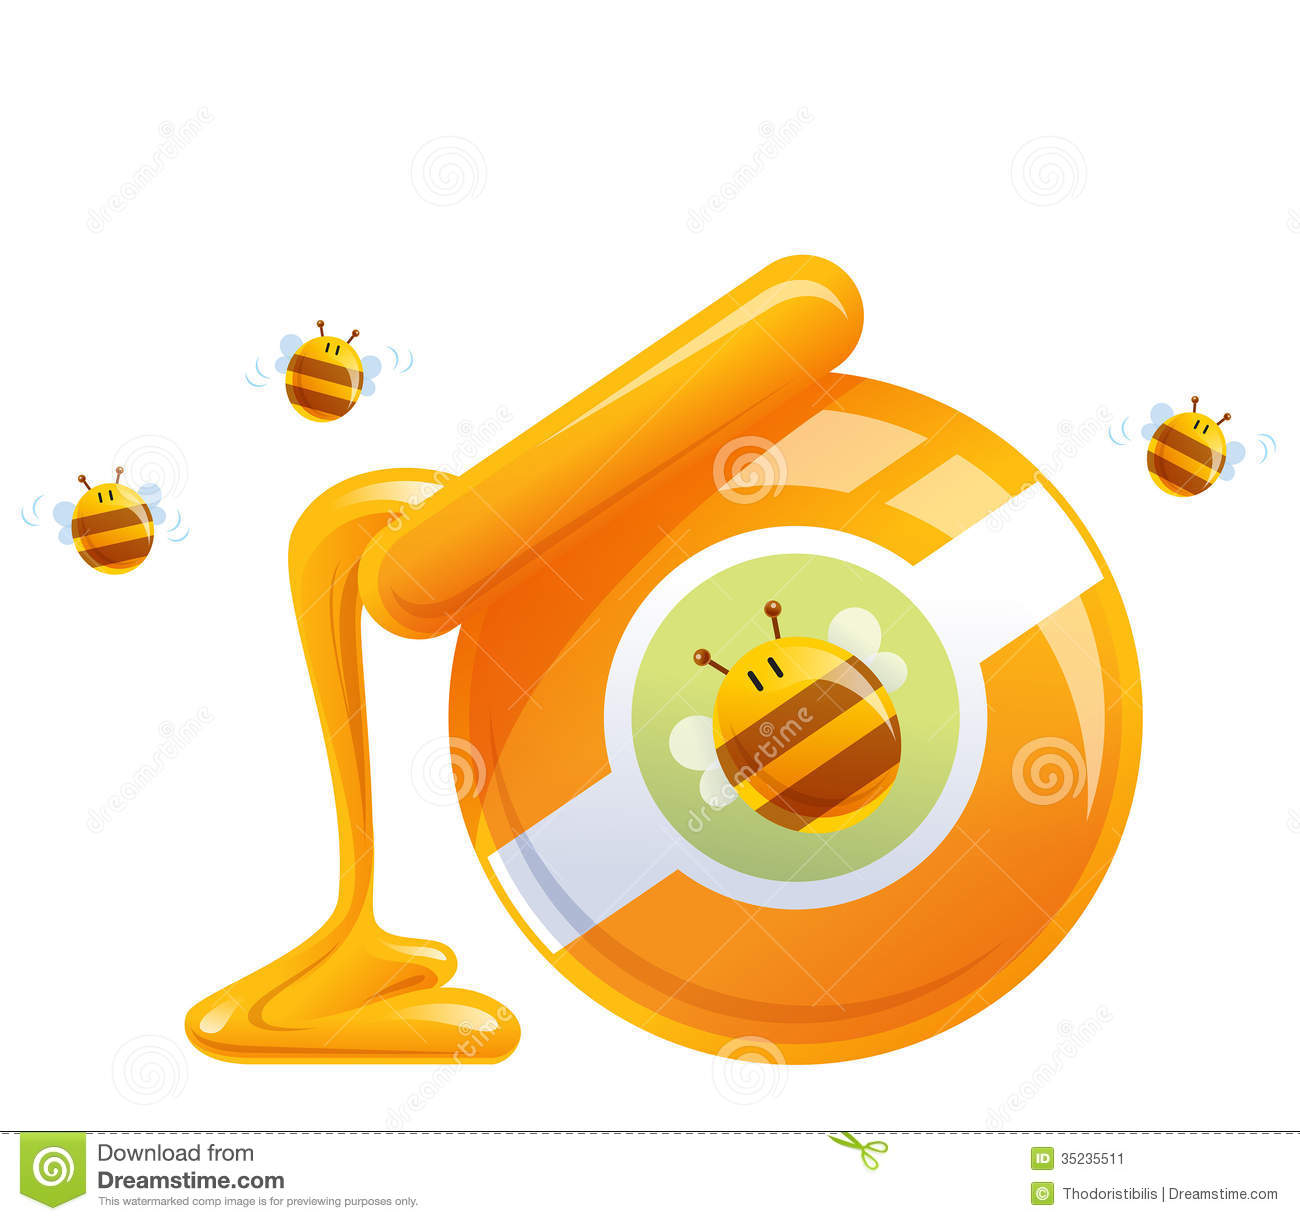 Galleries Related  Animated Bees  Bumble Bees Clip Art